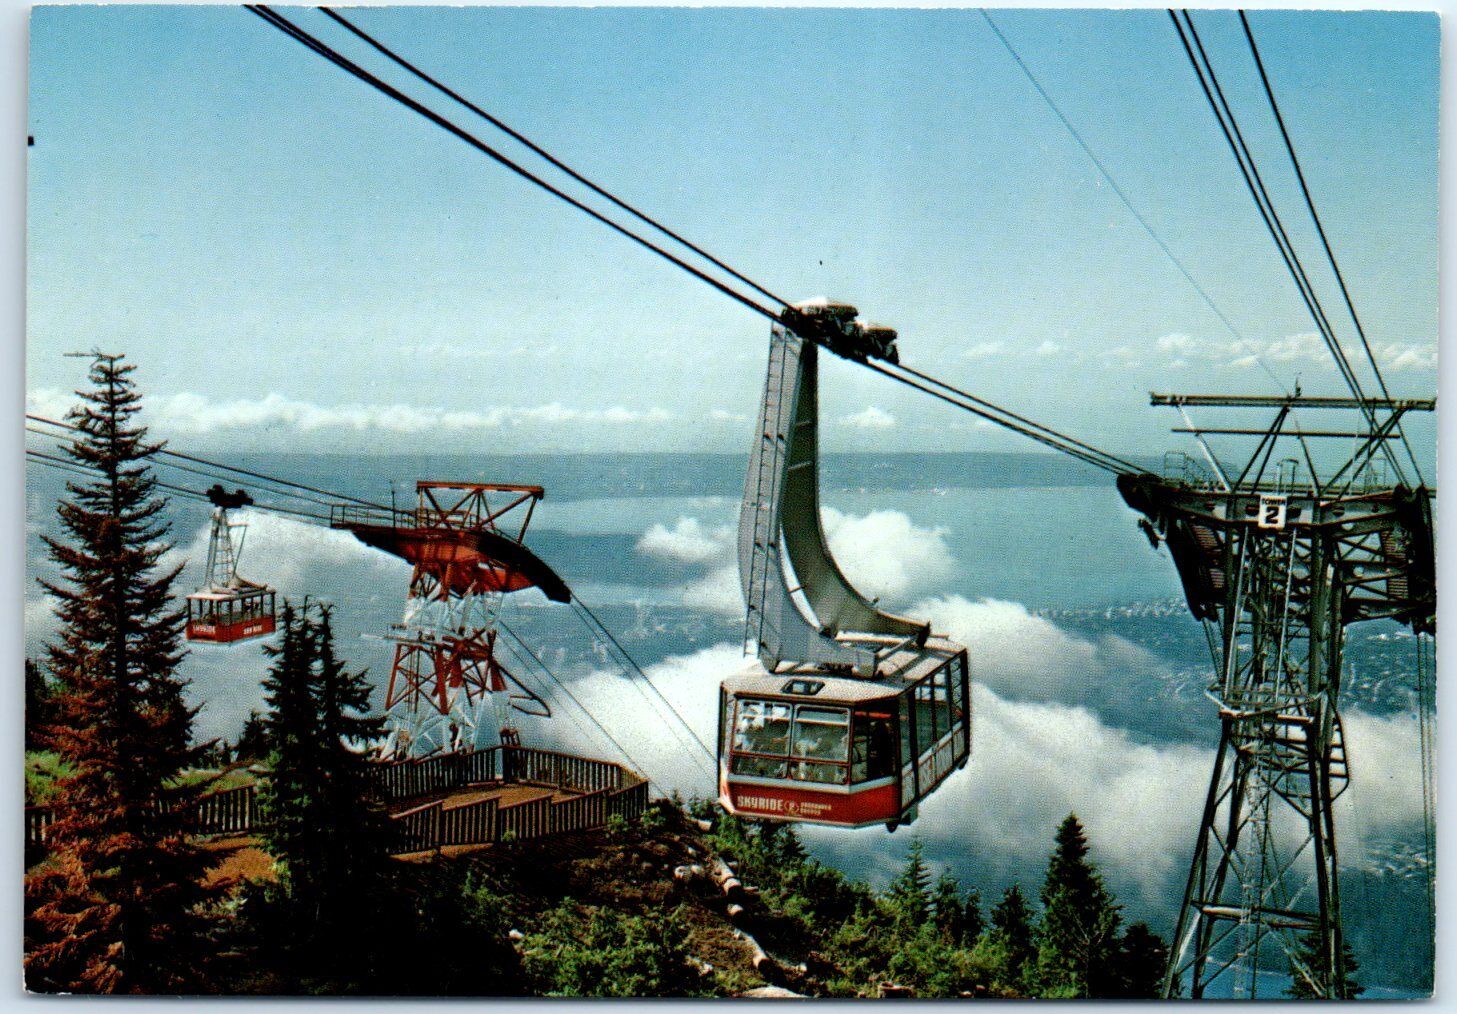 Postcard - Grouse Mountain - North Vancouver, Canada